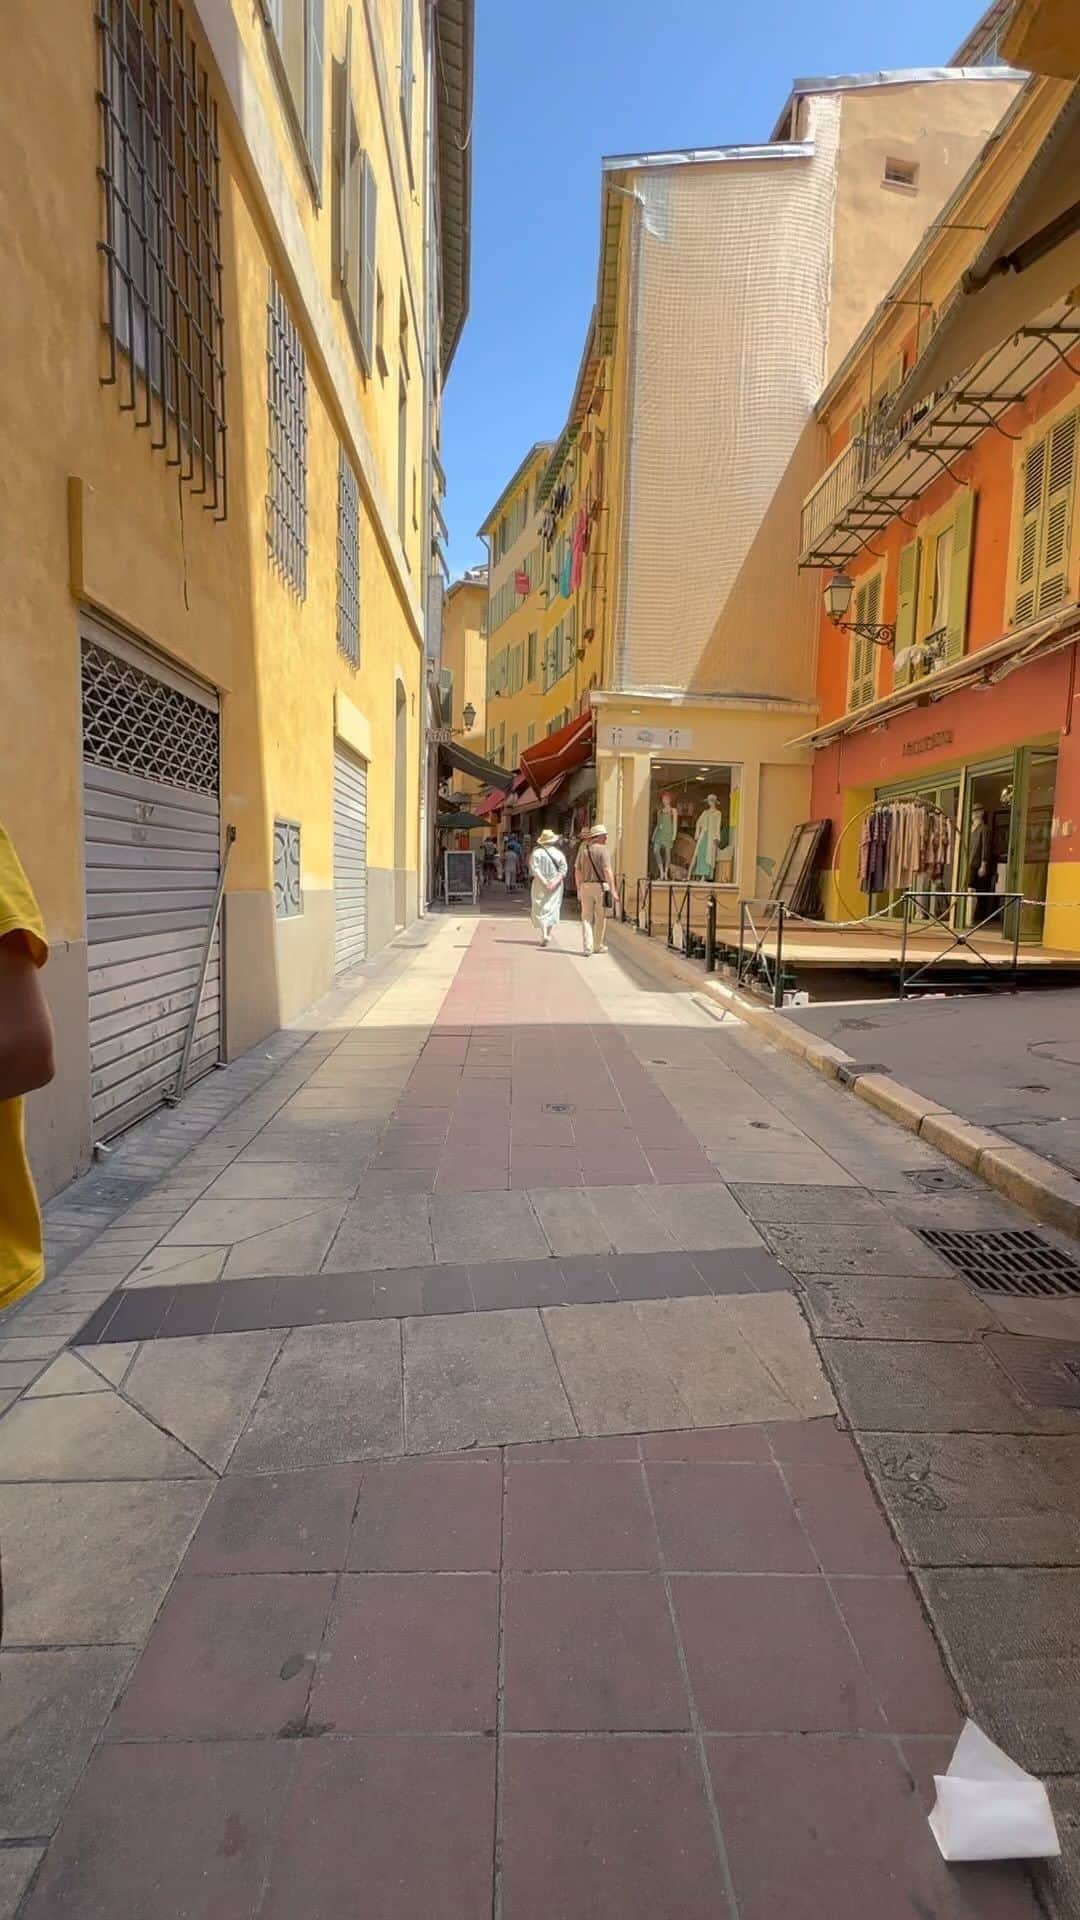 haru wagnusのインスタグラム：「I just walked around the old town of Nice. The colorful warm-toned buildings are fun to stroll through and inspire you to take photos. Behind this, there are handmade soap shops and spice shops, and I bought some spices again. The tomato red salt looked delicious, so I’ll make pasta with it next time🍅  But it’s so hot. I’m dizzy☀️  ニースの旧市街を散歩してきました。 カラフルな暖色な街並みが散歩してて楽しいし、スナップを撮るのに写欲を掻き立てられます。  この奥には手作りソープ屋さんや、スパイスショップもあって、ぼくはまたスパイスを書いました。トマトレッドソルトが、美味しそうだったので今度それでパスタを作りない🍅  しかし、それにしても暑い〜☀️くらくるする。  #nice #nicefrance #france #ニース #ニース観光 #撮影旅行 #jtbで旅したい #jtb #旅行 #travelreels #traveltofrance #travelphoto #traveleurope #nicestreetart #southfrance #summervibes」